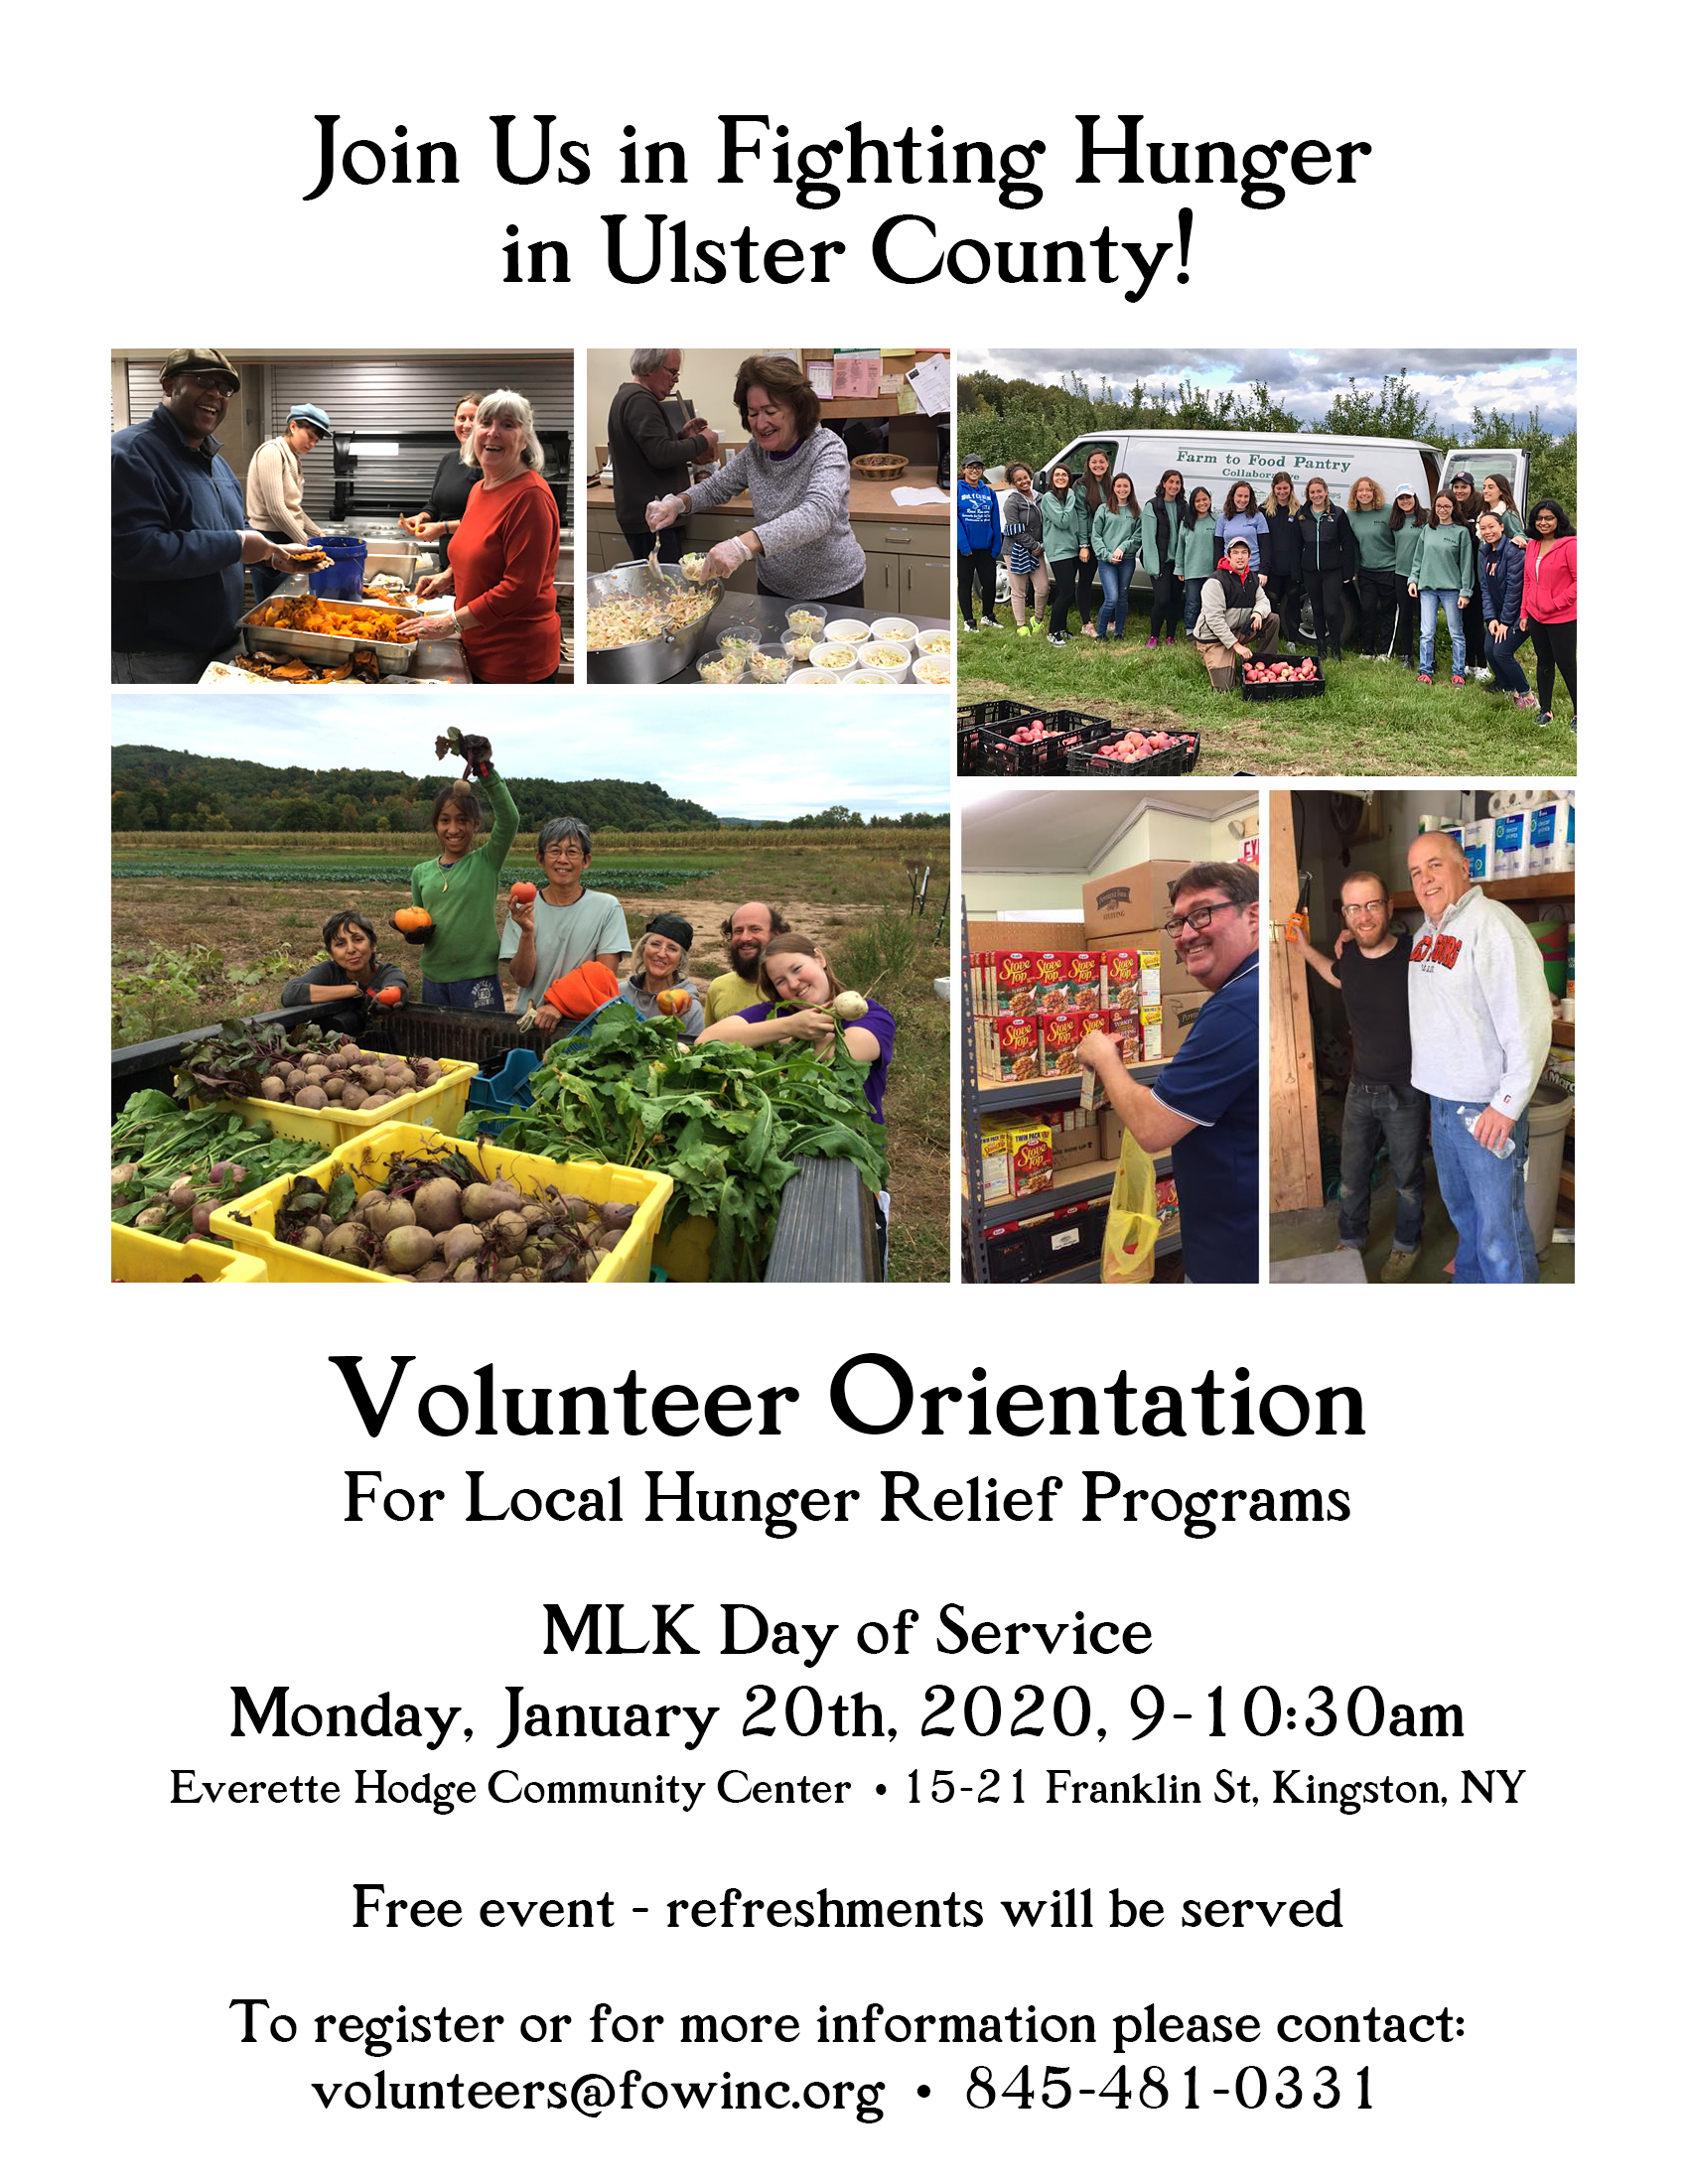 MLK Day of Service Volunteer Orientation for local hunger relief programs